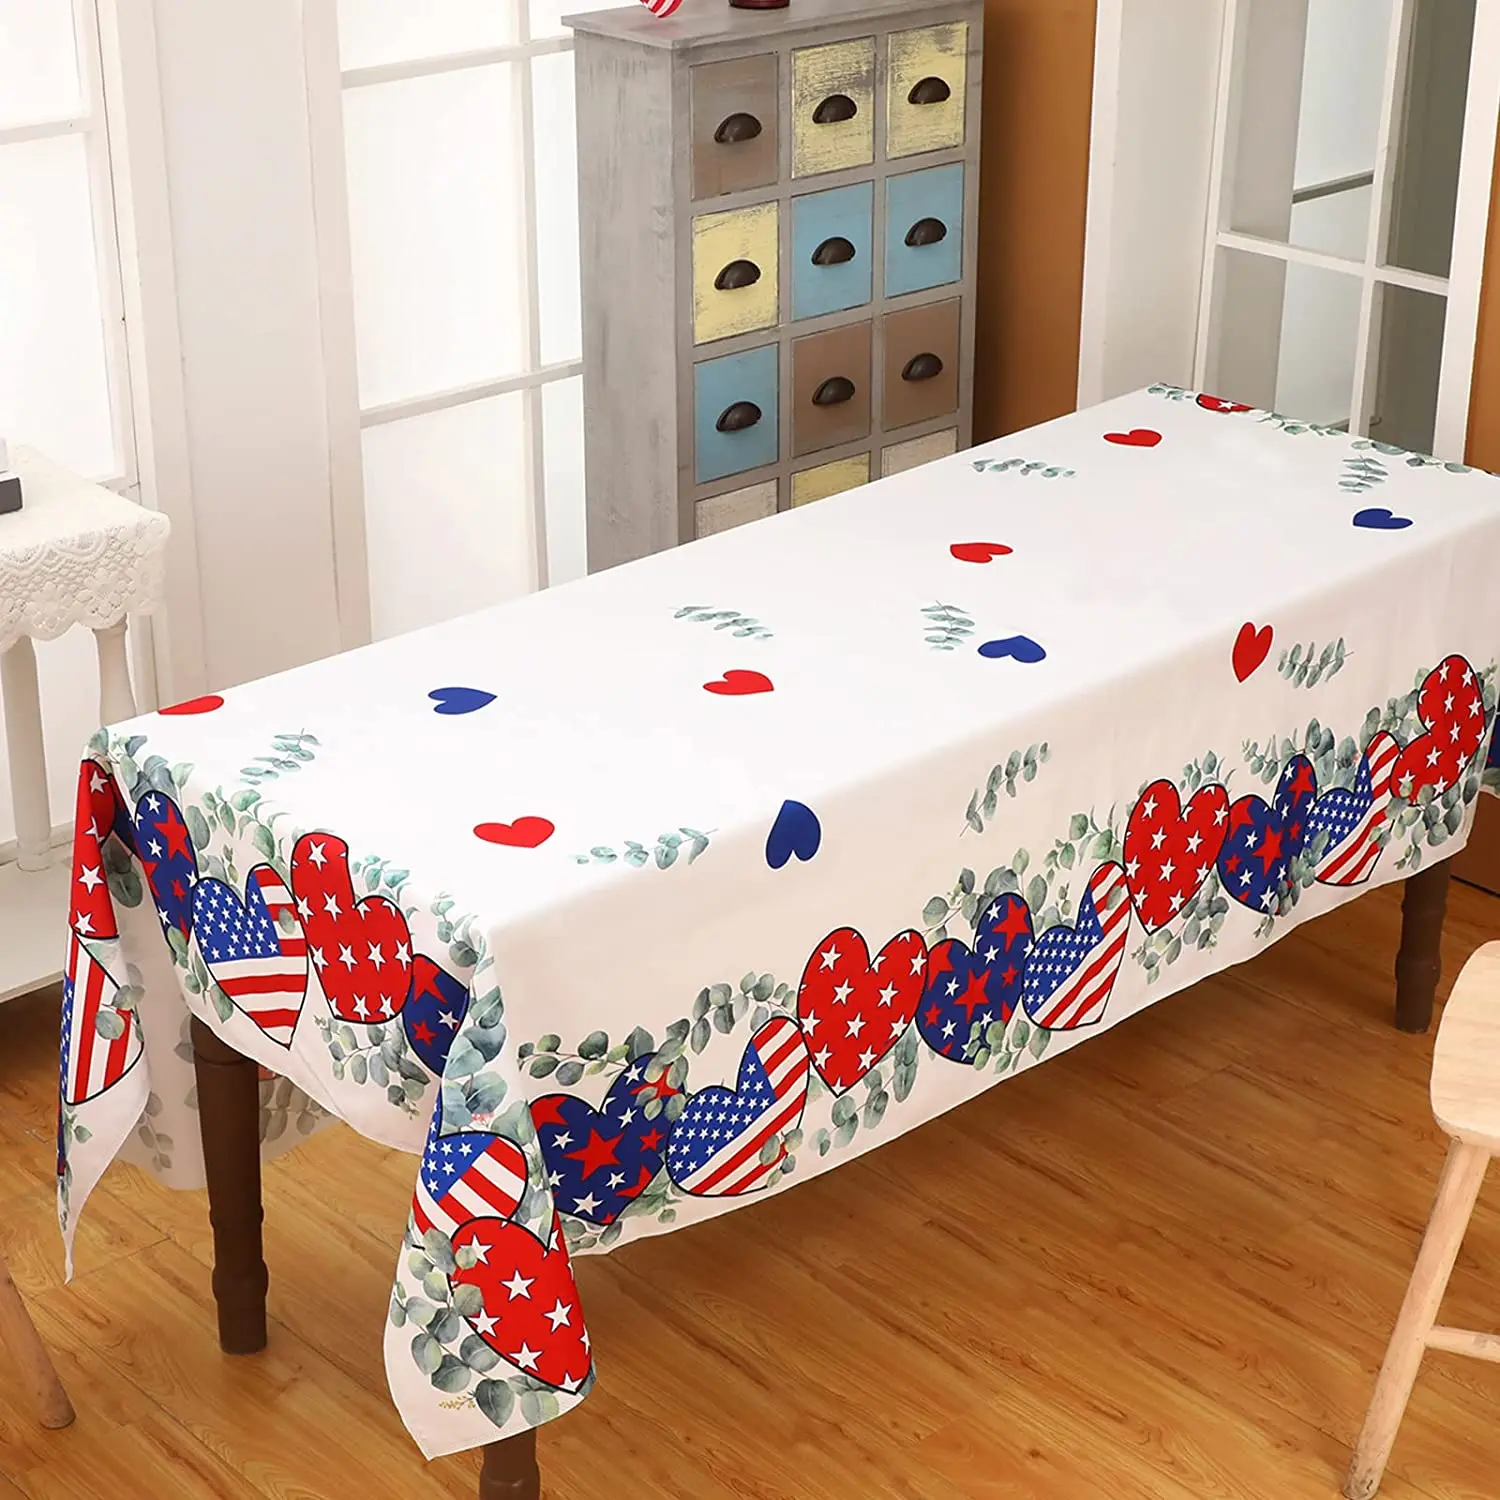 

4th of July Rectangle Patriotic Tablecloth Memorial Day Holiday Decoratons Independence Day Waterproof Table Cover Party Decor